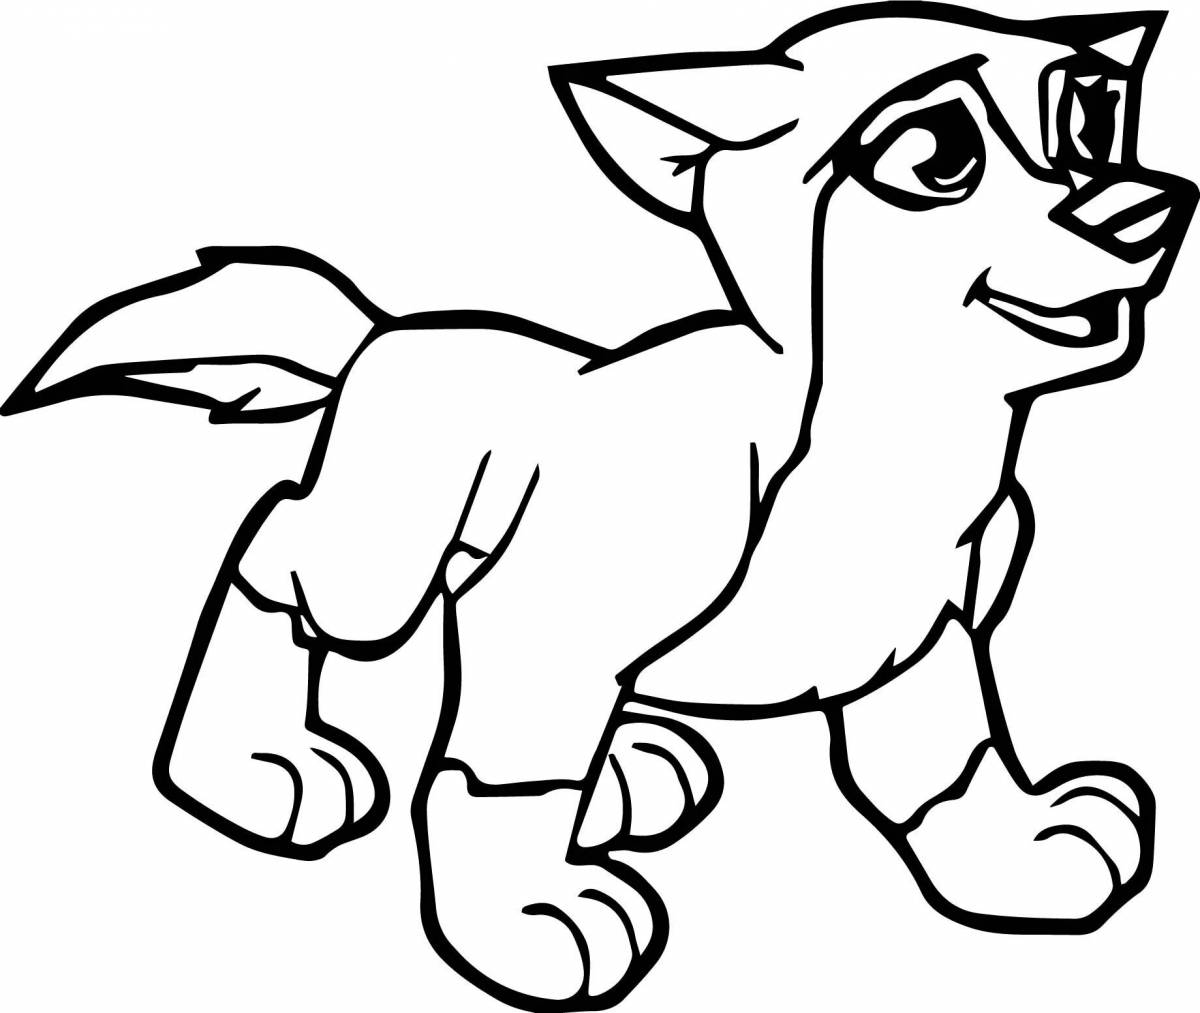 Coloring page of a spectacular wolf cub